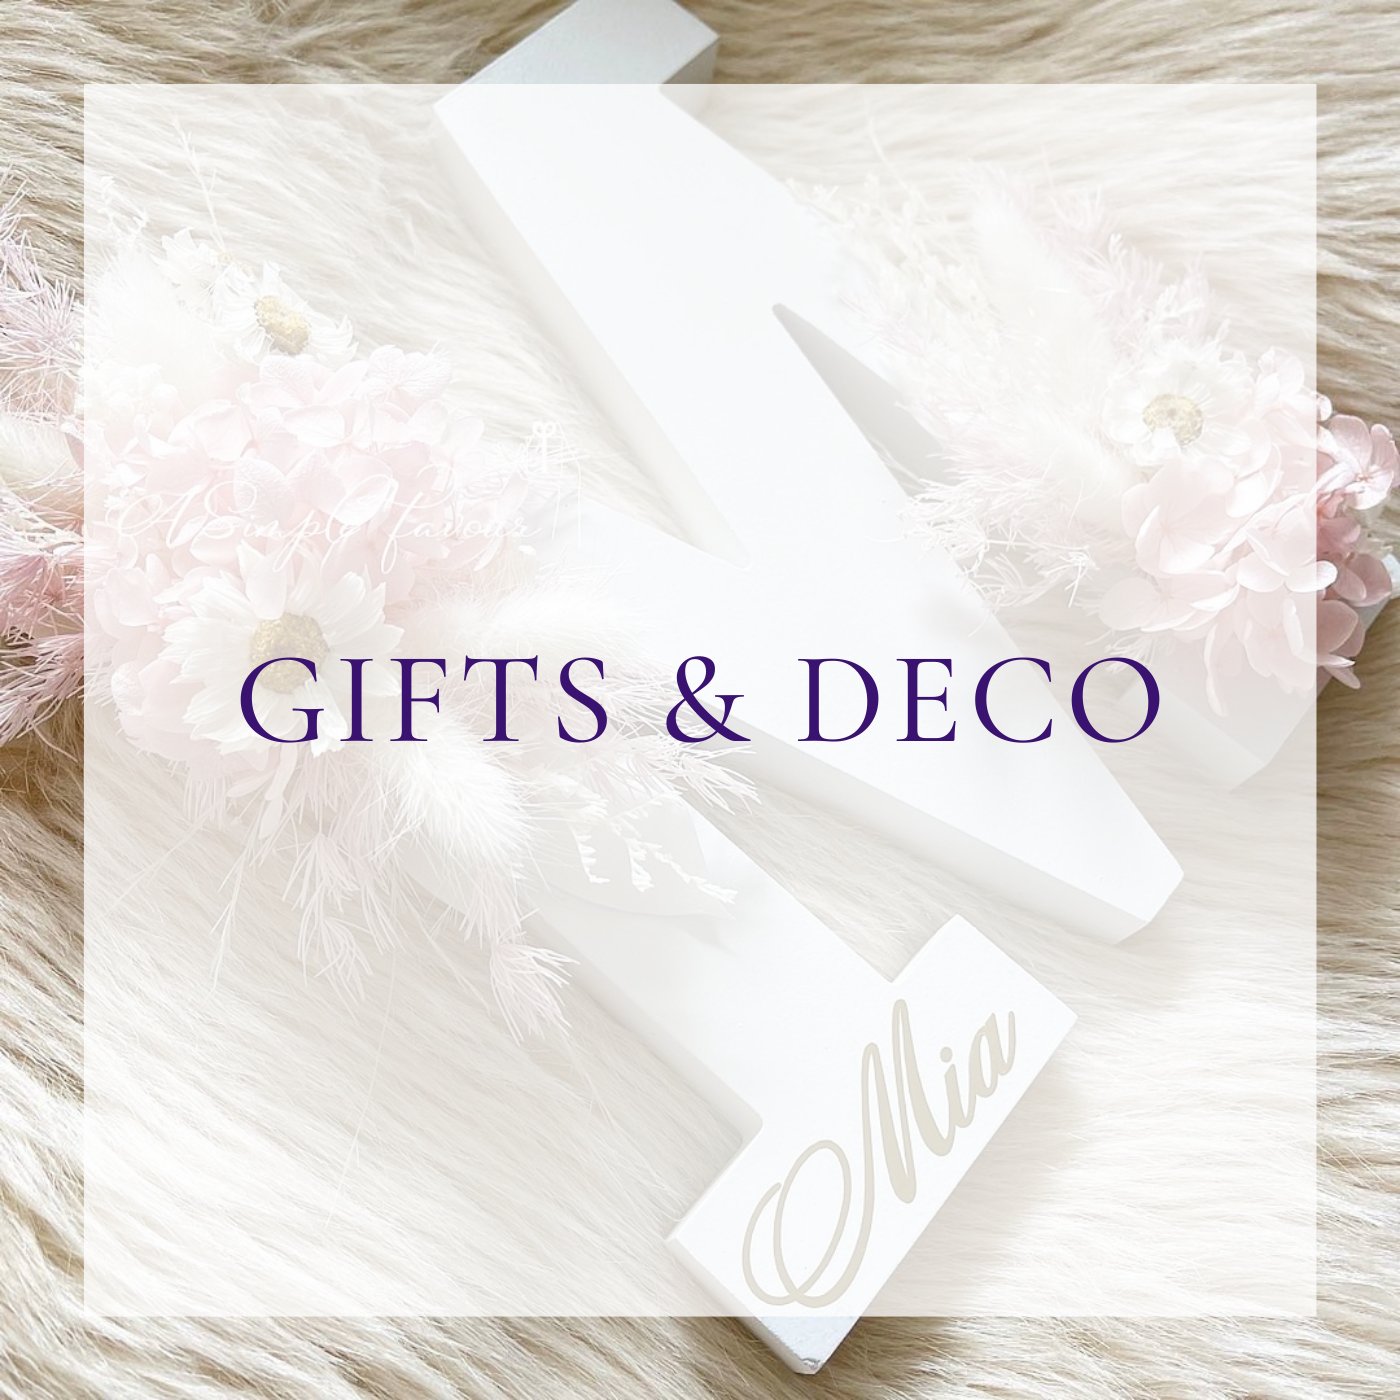 Gifts & Deco